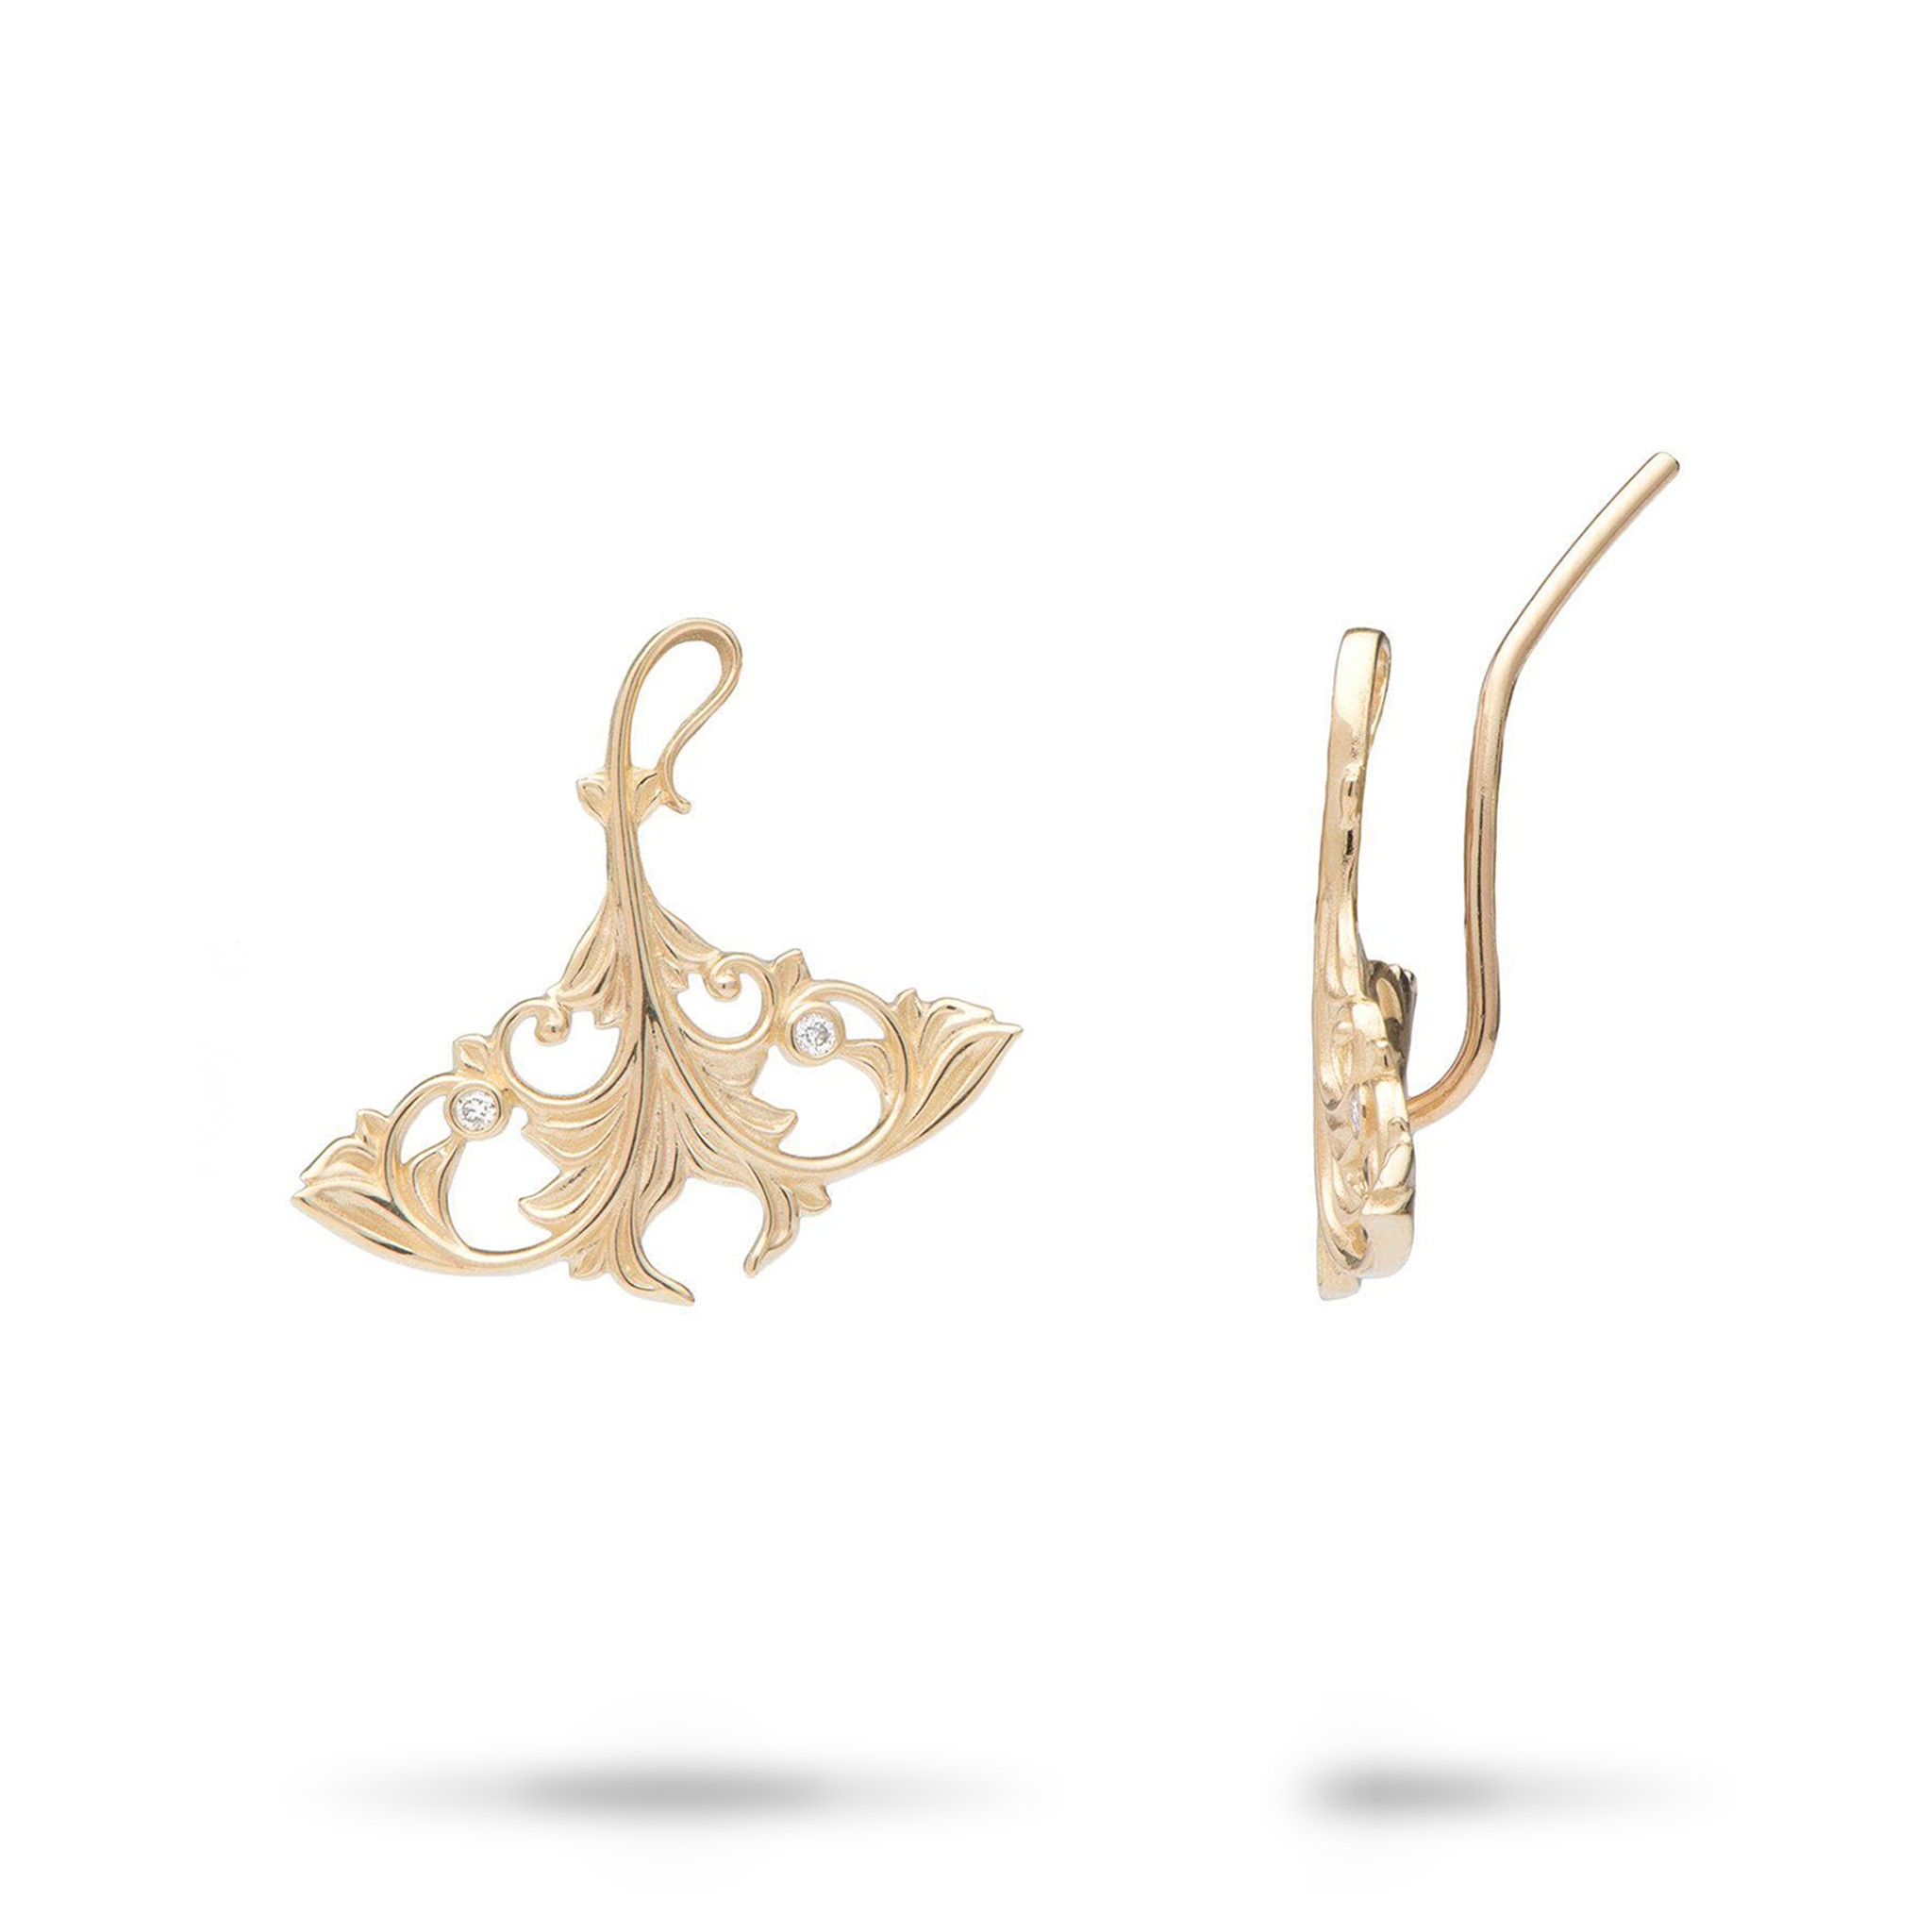 Living Heirloom Manta Ray Climber Earrings in Gold with Diamonds - 20mm